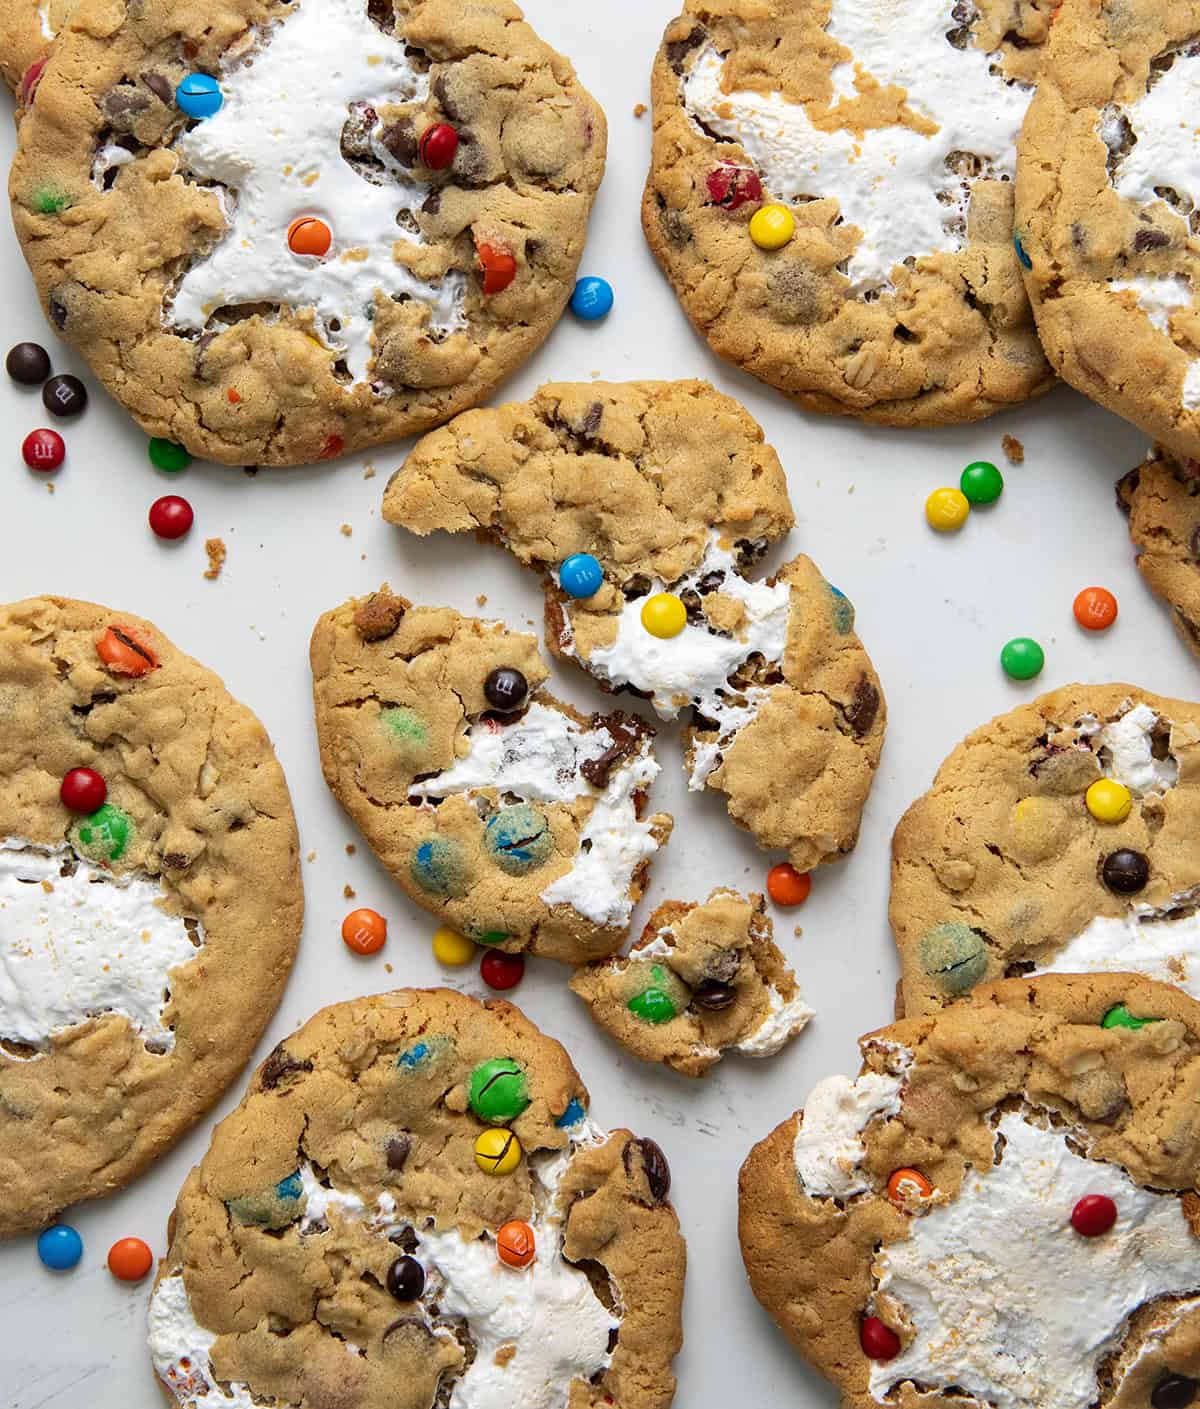 Marshmallow Monster Cookies on a white table with center cookie broken in half showing gooey marshmallow.